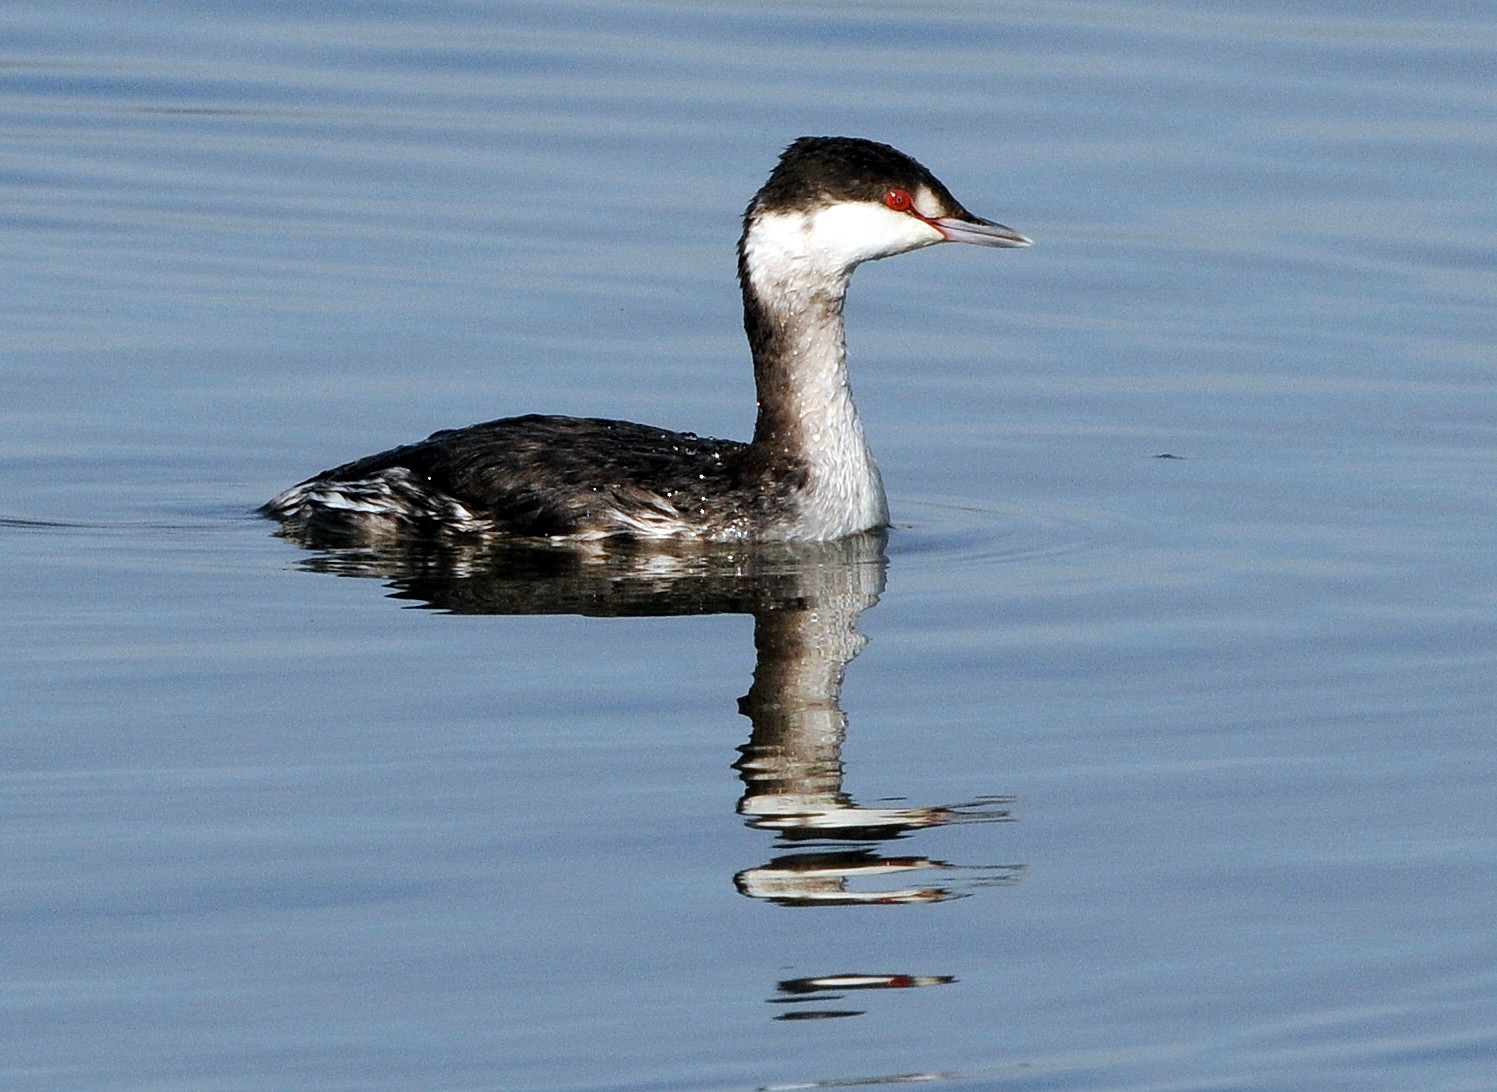 Horned Grebes are among the frequently spotted Winter Waterfowl in the waters of Pelham Bay Park. Photo: Peter Massas/CC BY-SA 2.0